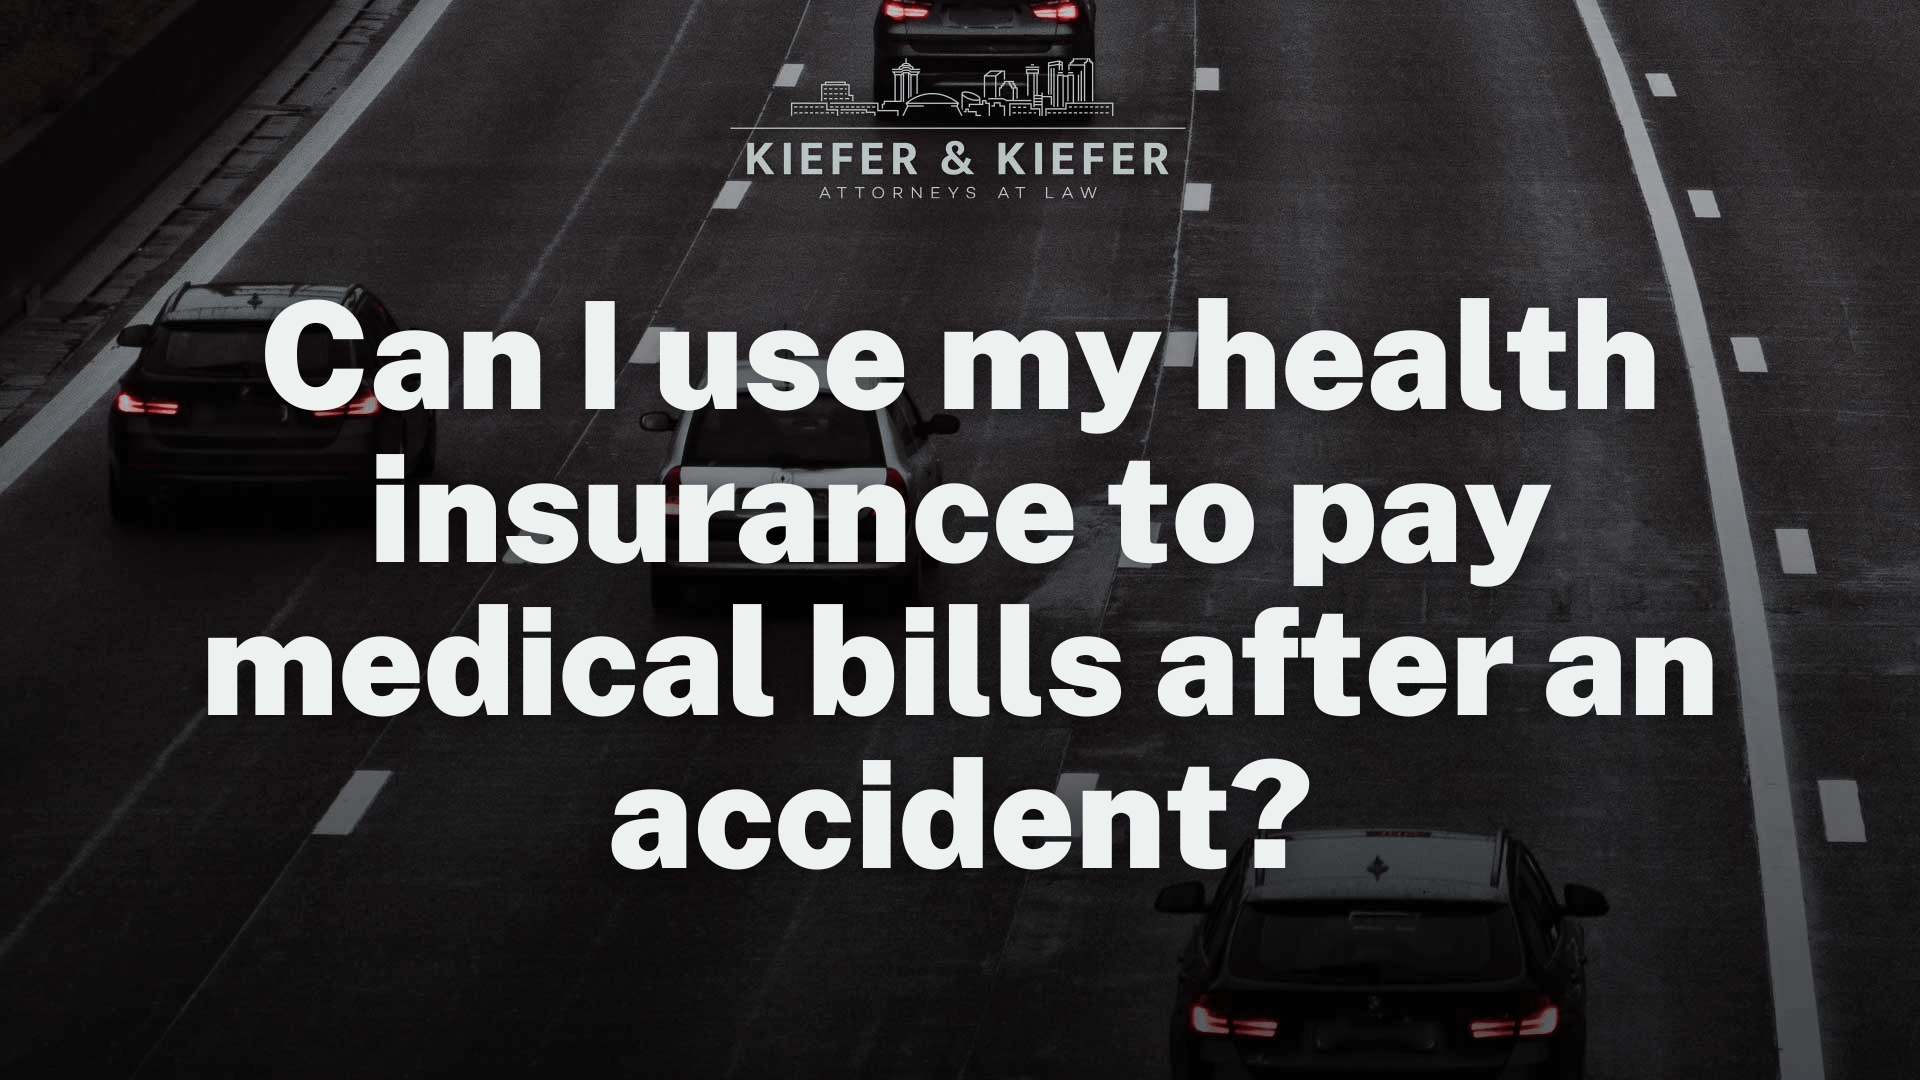 Can I use my health insurance to pay medical bills after an accident- Kiefer & Kiefer New Orleans Personal Injury Attorneys